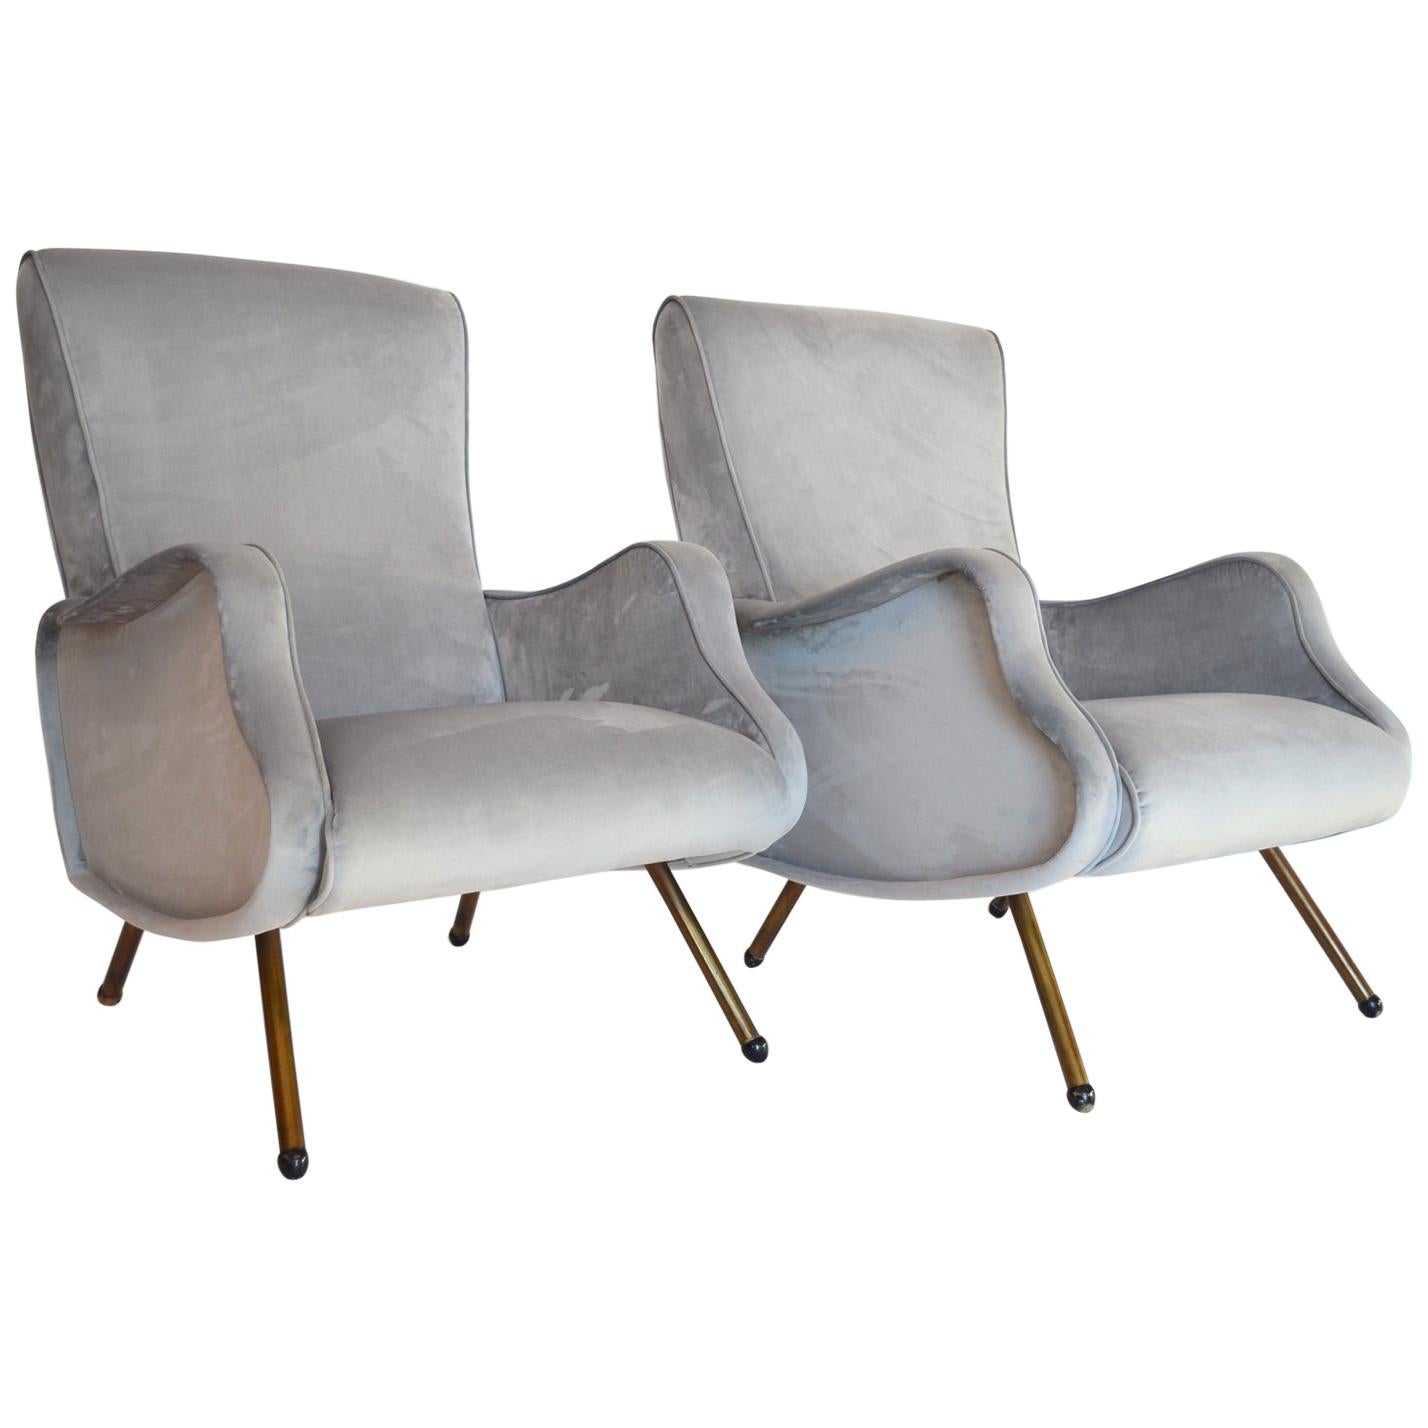 Italian Midcentury Armchairs Restored and Reupholstered in Grey Velvet, 1950s